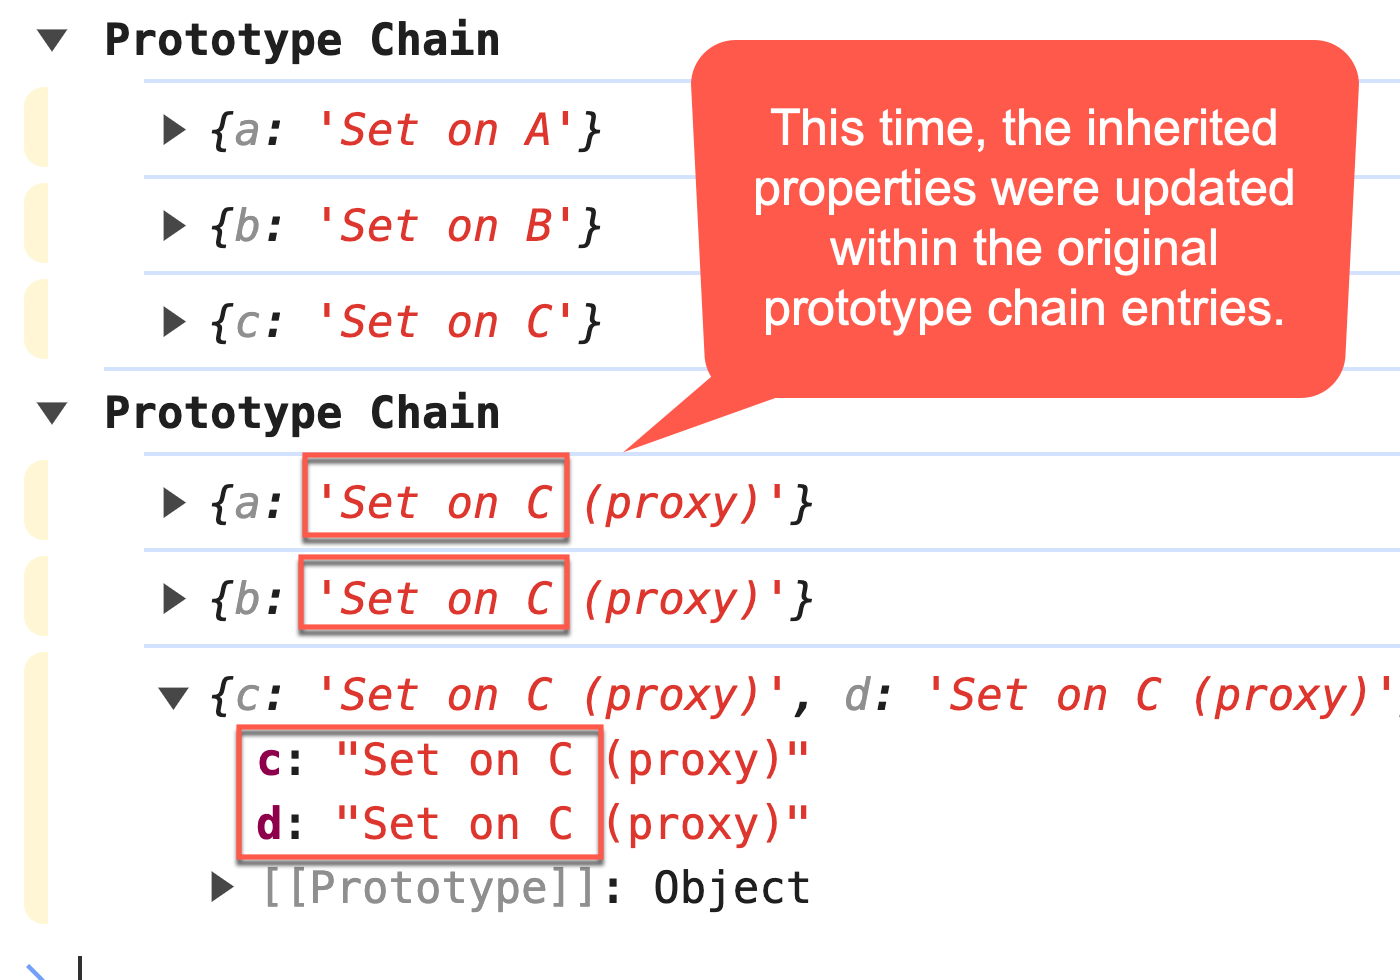 Console output showing Proxy-powered data access behavior in the prototype chain in JavaScript: all properties are written to the original prototype chain entry.